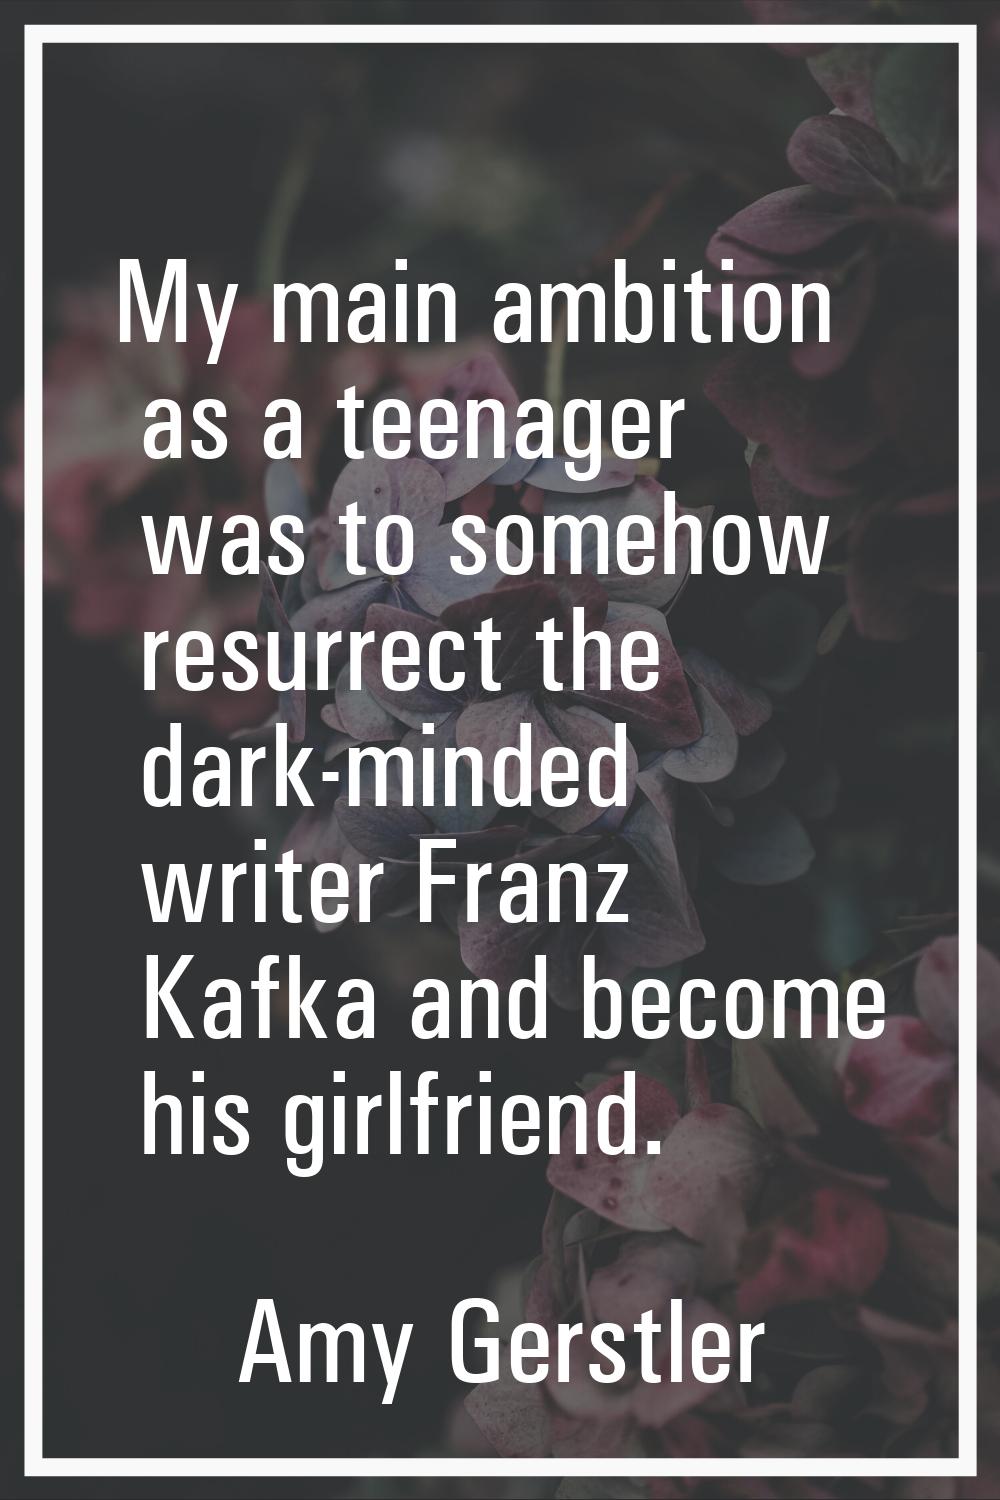 My main ambition as a teenager was to somehow resurrect the dark-minded writer Franz Kafka and beco